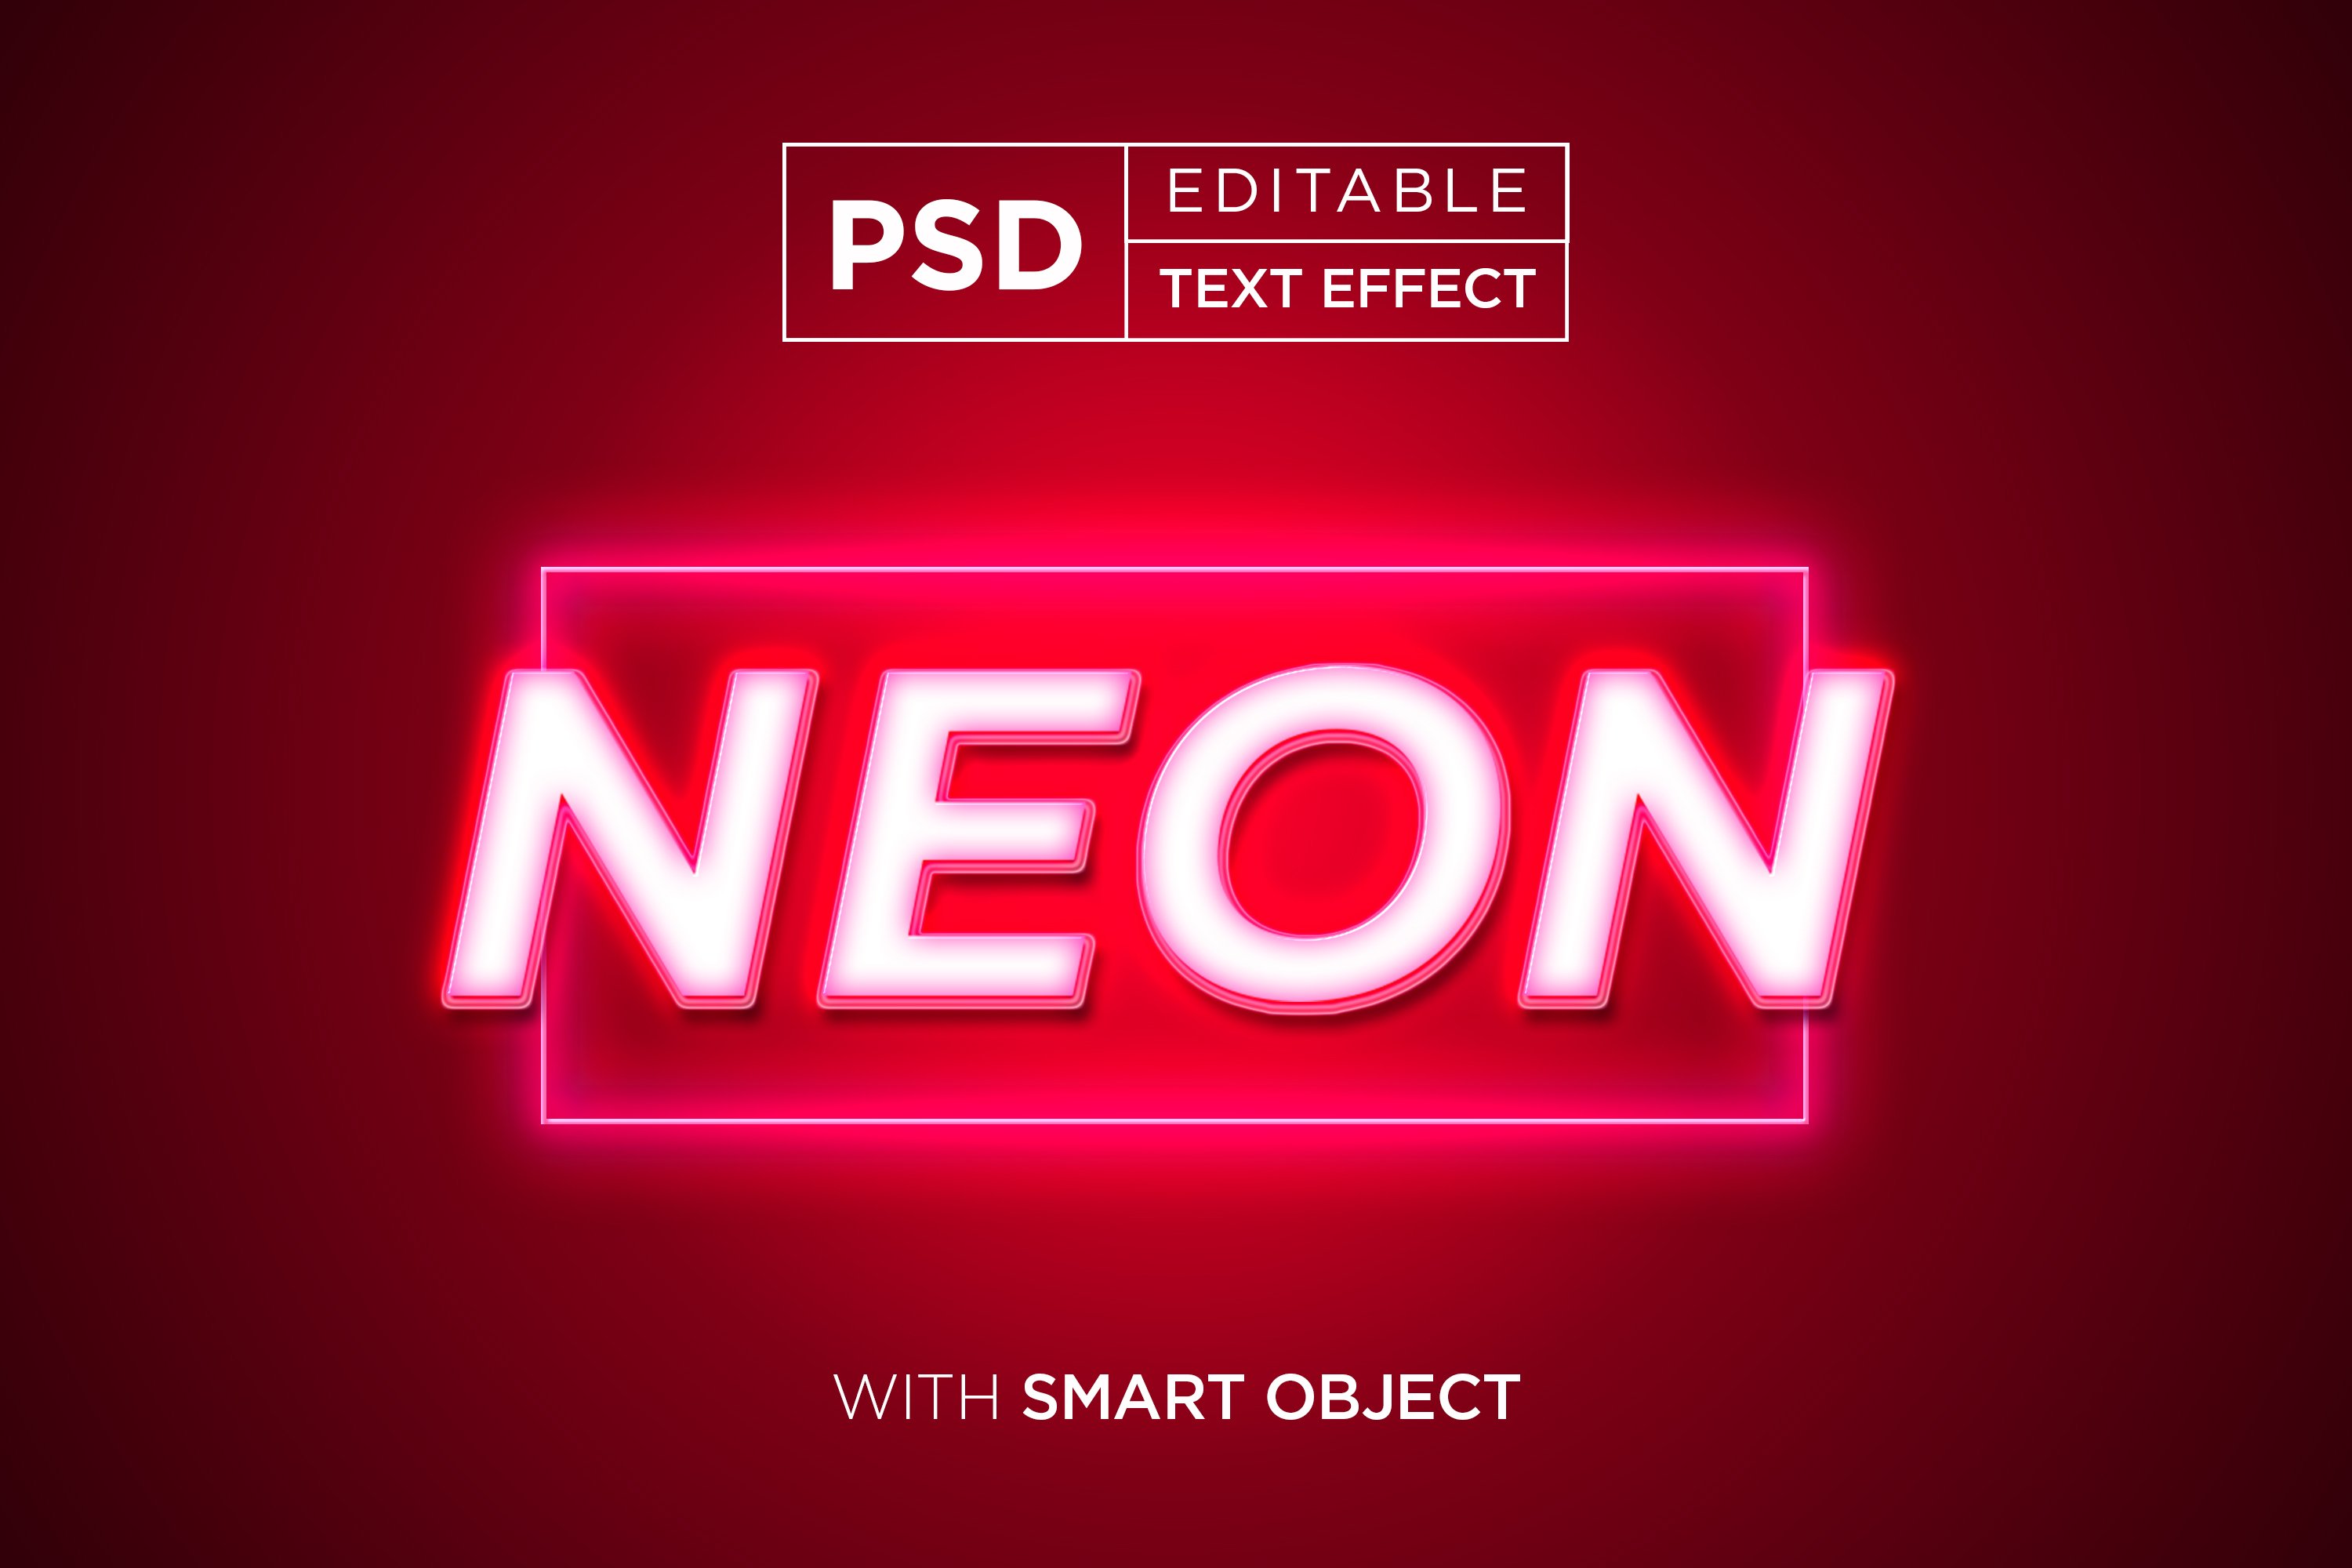 GLOW NEON TEXT EFFECT BUNDLEpreview image.